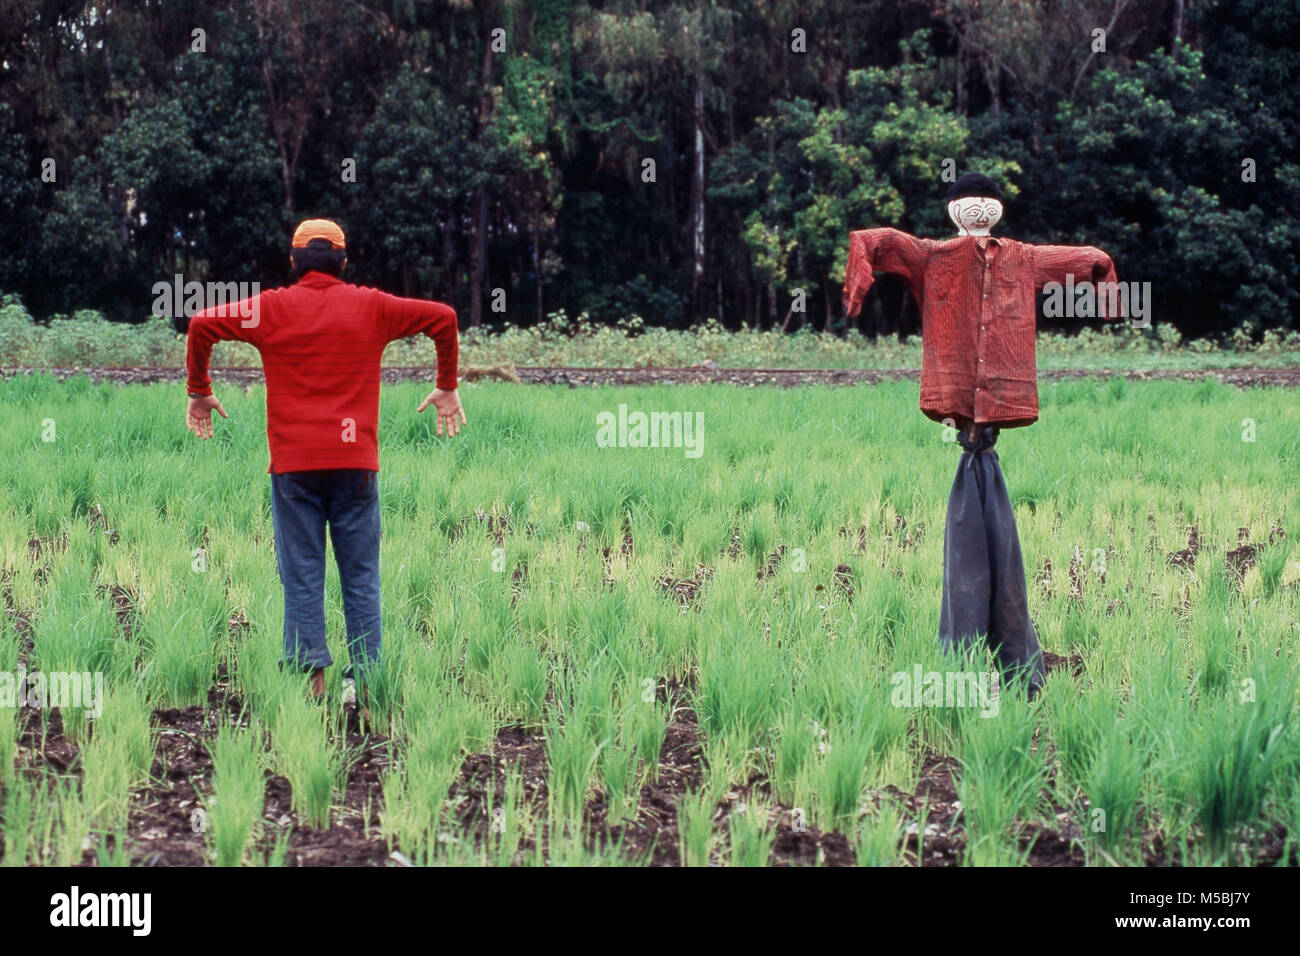 Scarecrows one human and one artificial, Pune Maharashtra, India Stock Photo